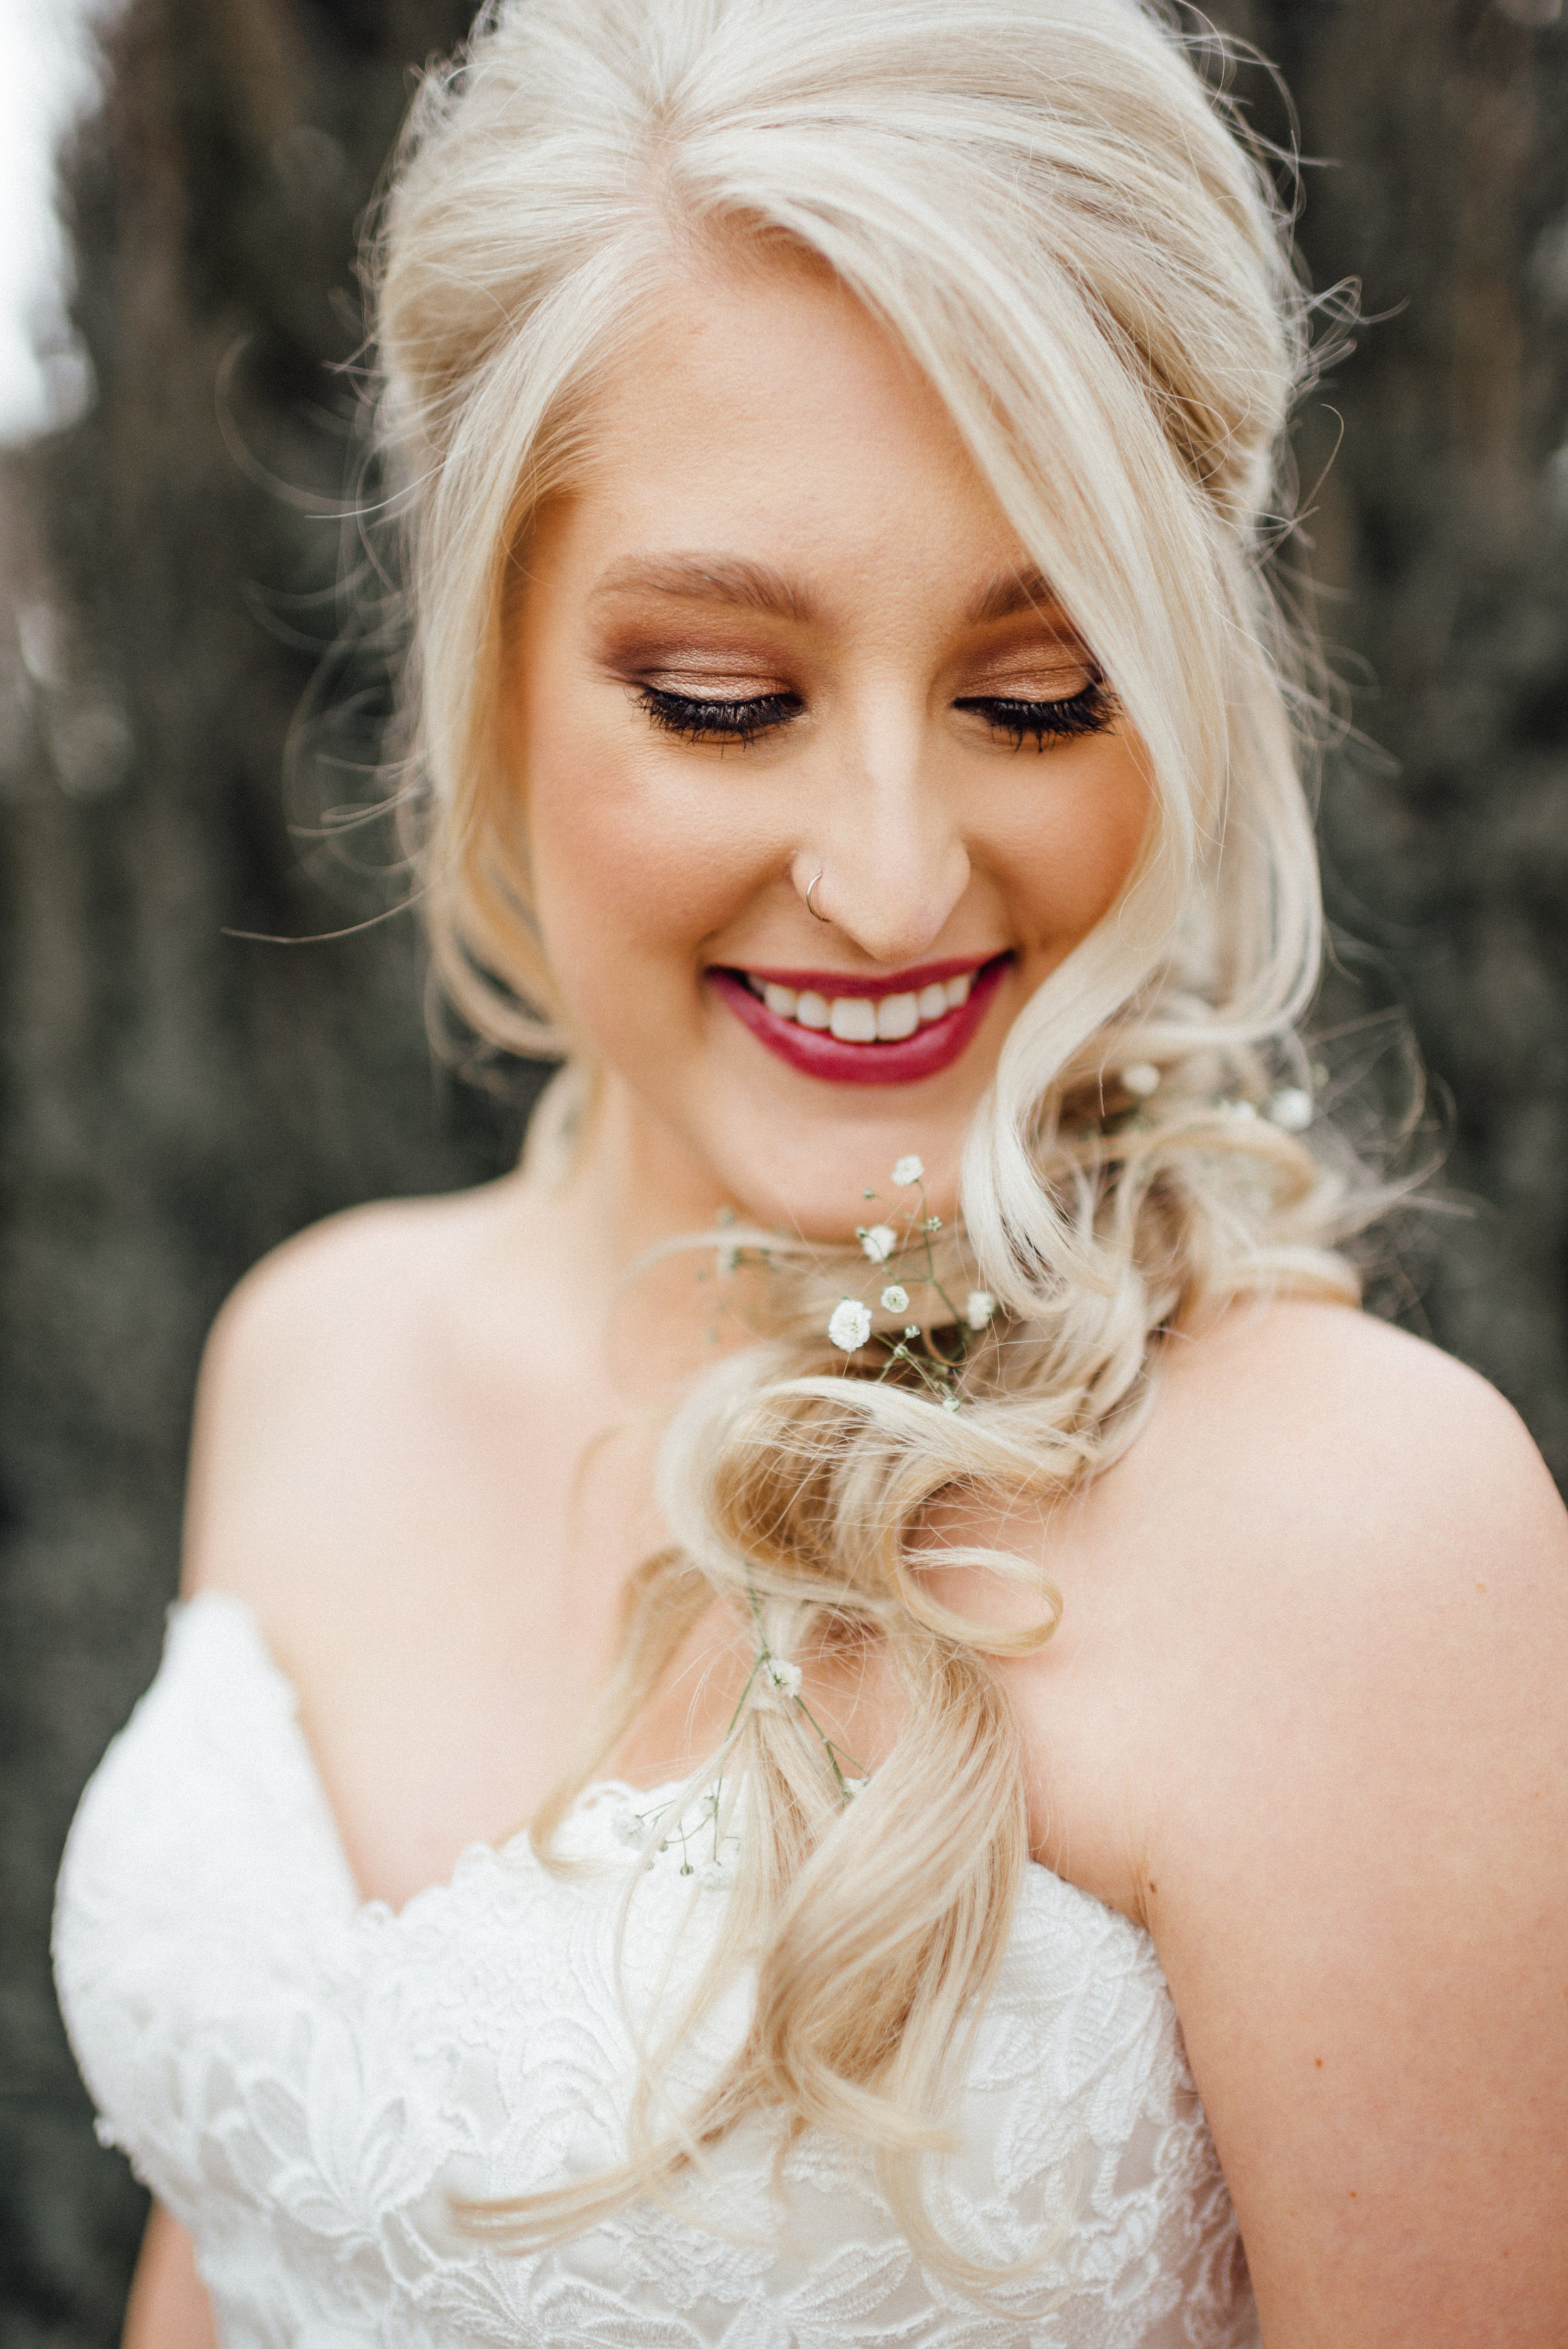 View the latest weddings, hair tips and tricks, and product  giveaways-Preslee Hair Style